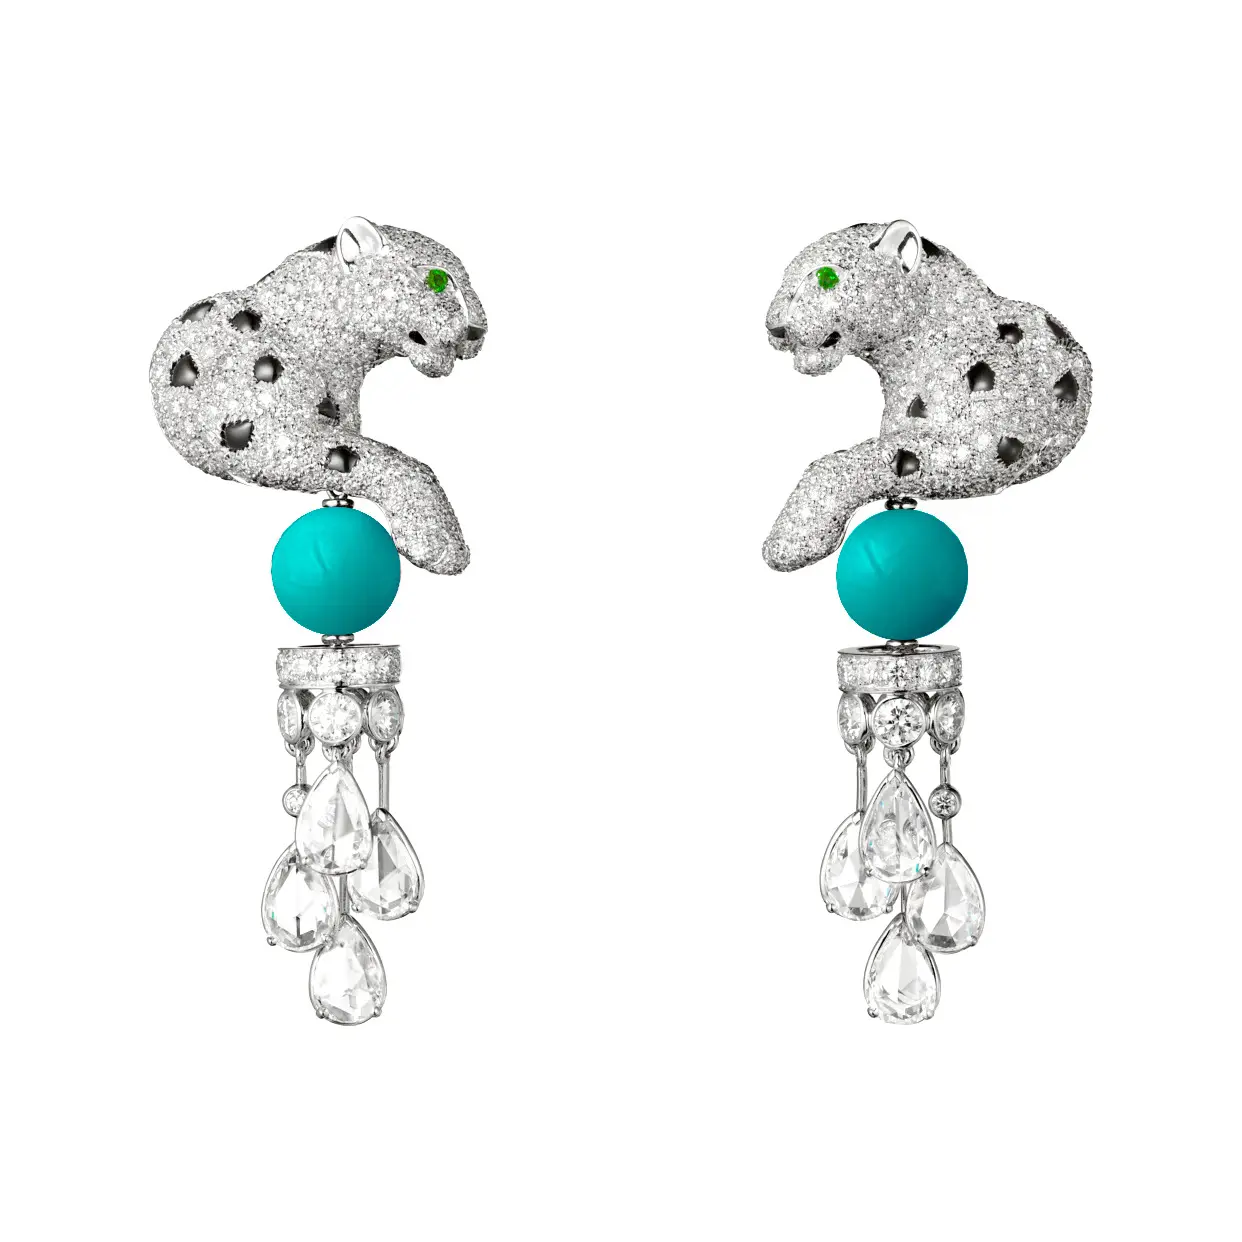 Wholesale pendant chains are all 925 silver gold-plated zircon animal turquoise cheetah Leopard earrings